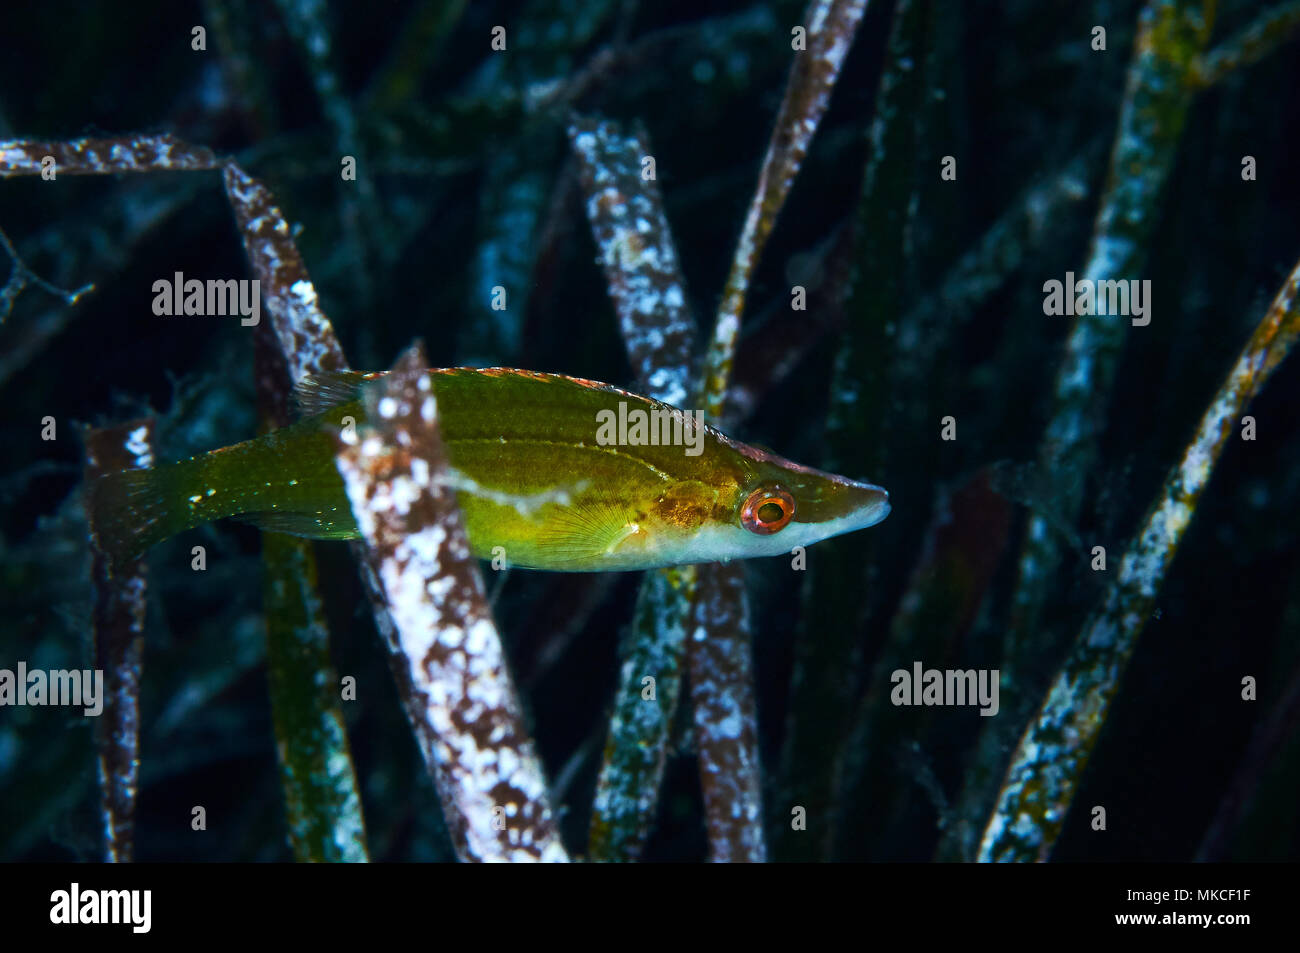 A pointed-snout wrasse (Symphodus rostratus) between neptune grass (Posidonia oceanica) leaves in Mediterranean Sea(Formentera,Balearic Islands,Spain) Stock Photo